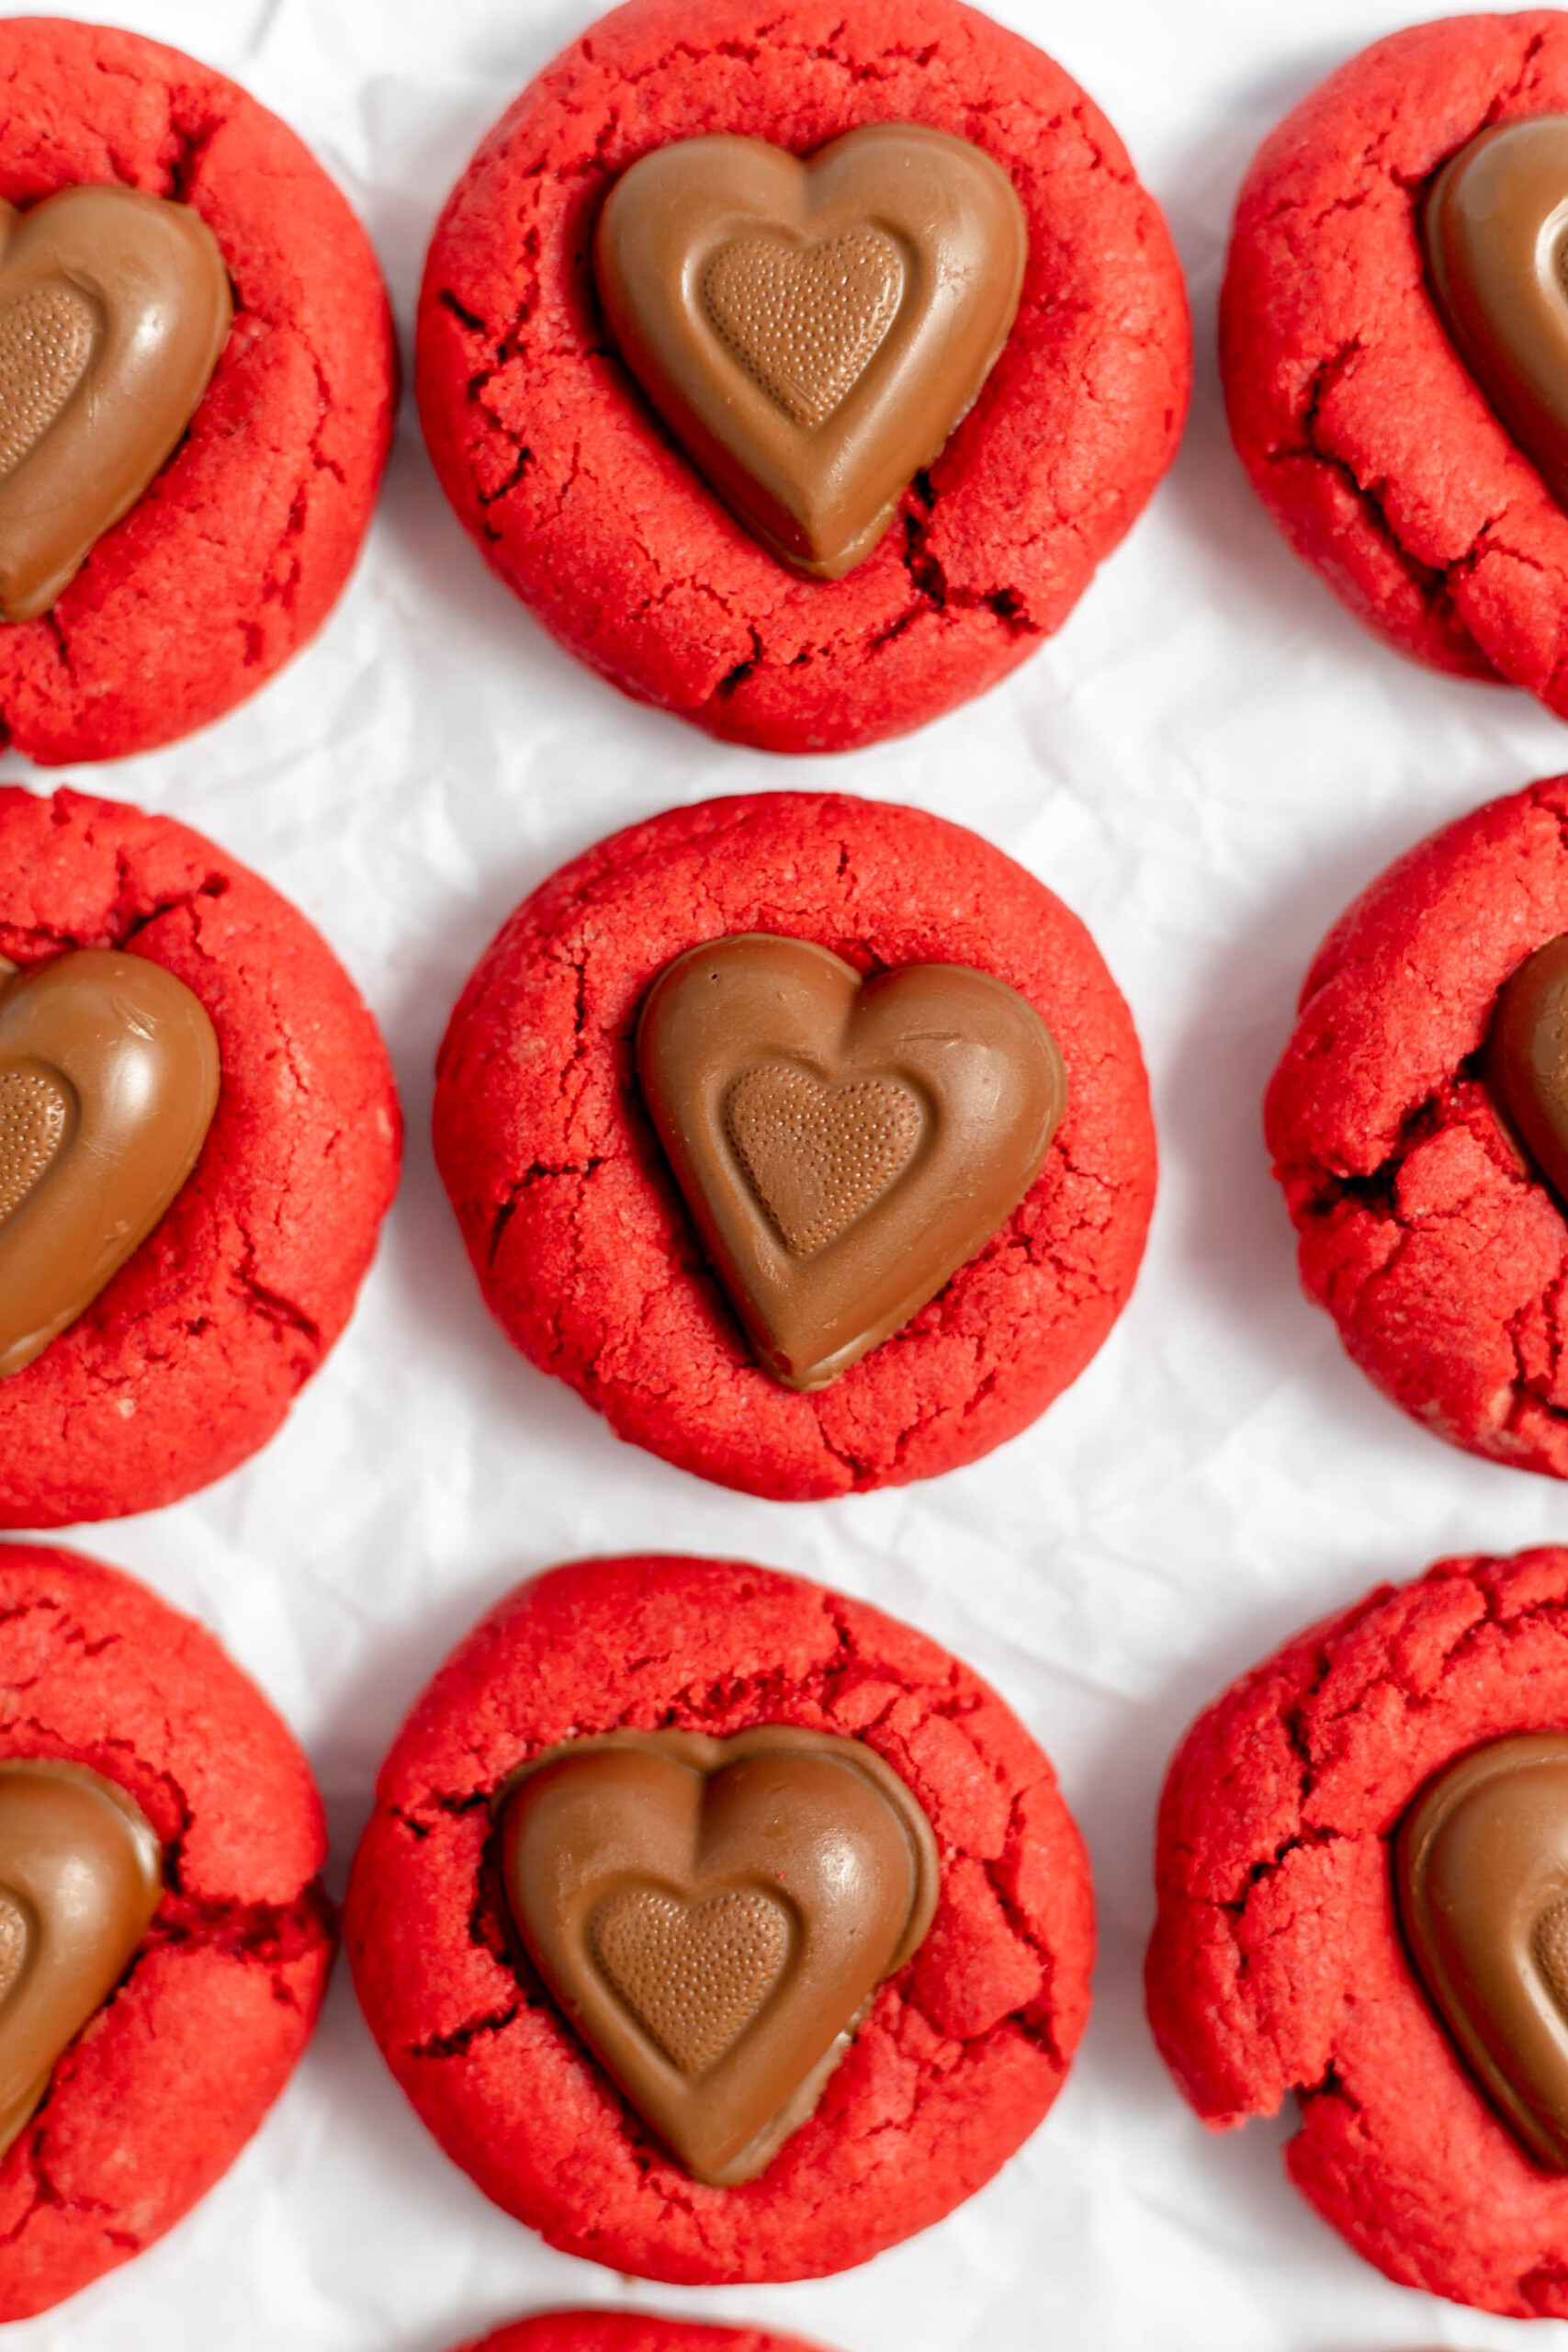 Red velvet cookies with chocolate hearts pressed into the tops.